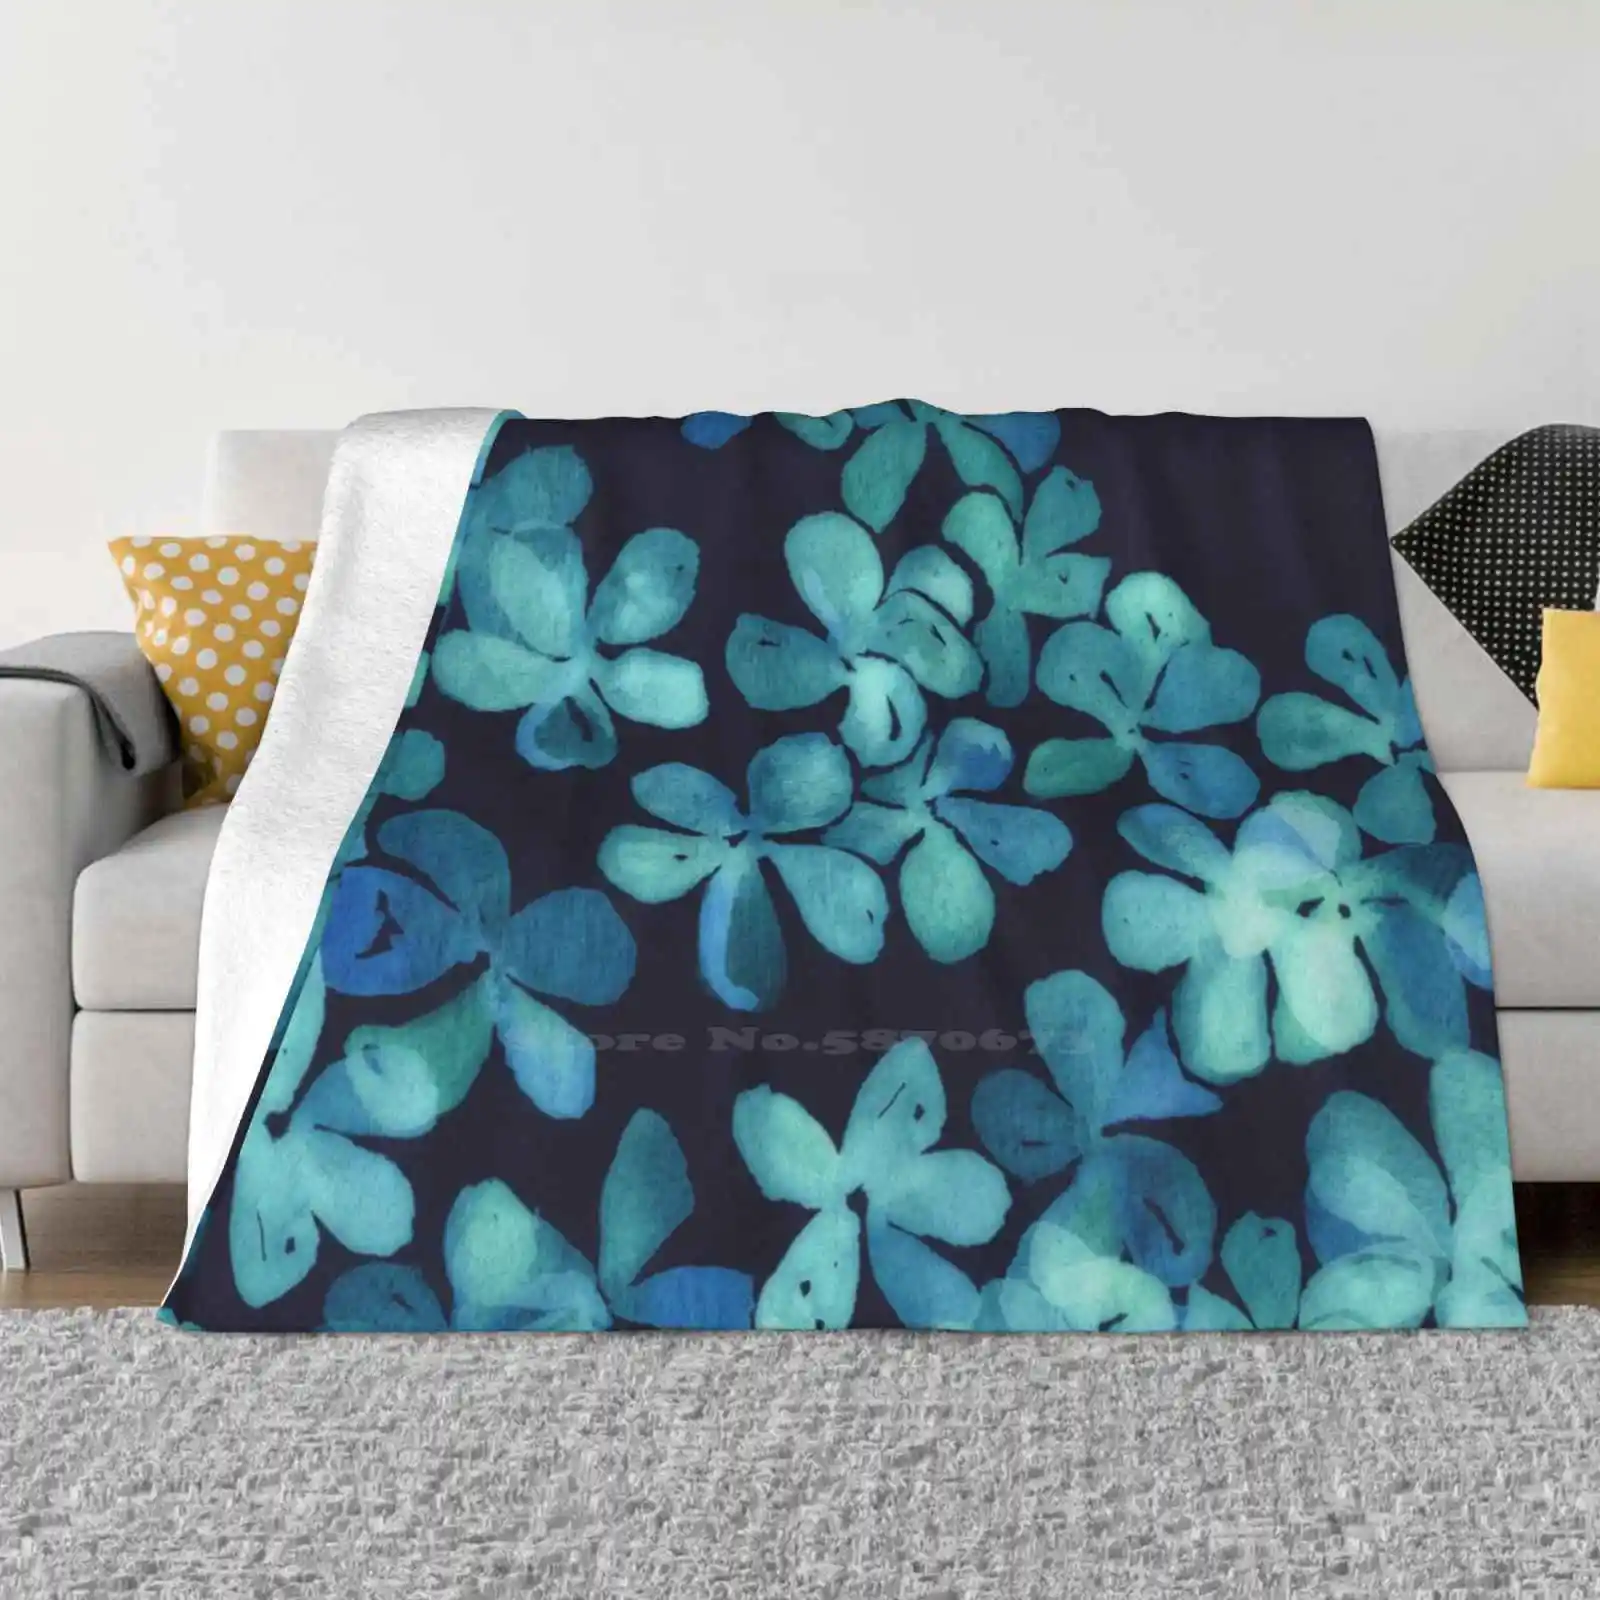 

Hand Painted Floral Pattern In Teal & Navy Blue New Arrival Fashion Leisure Warm Flannel Blanket Blue Flowers Floral Painted